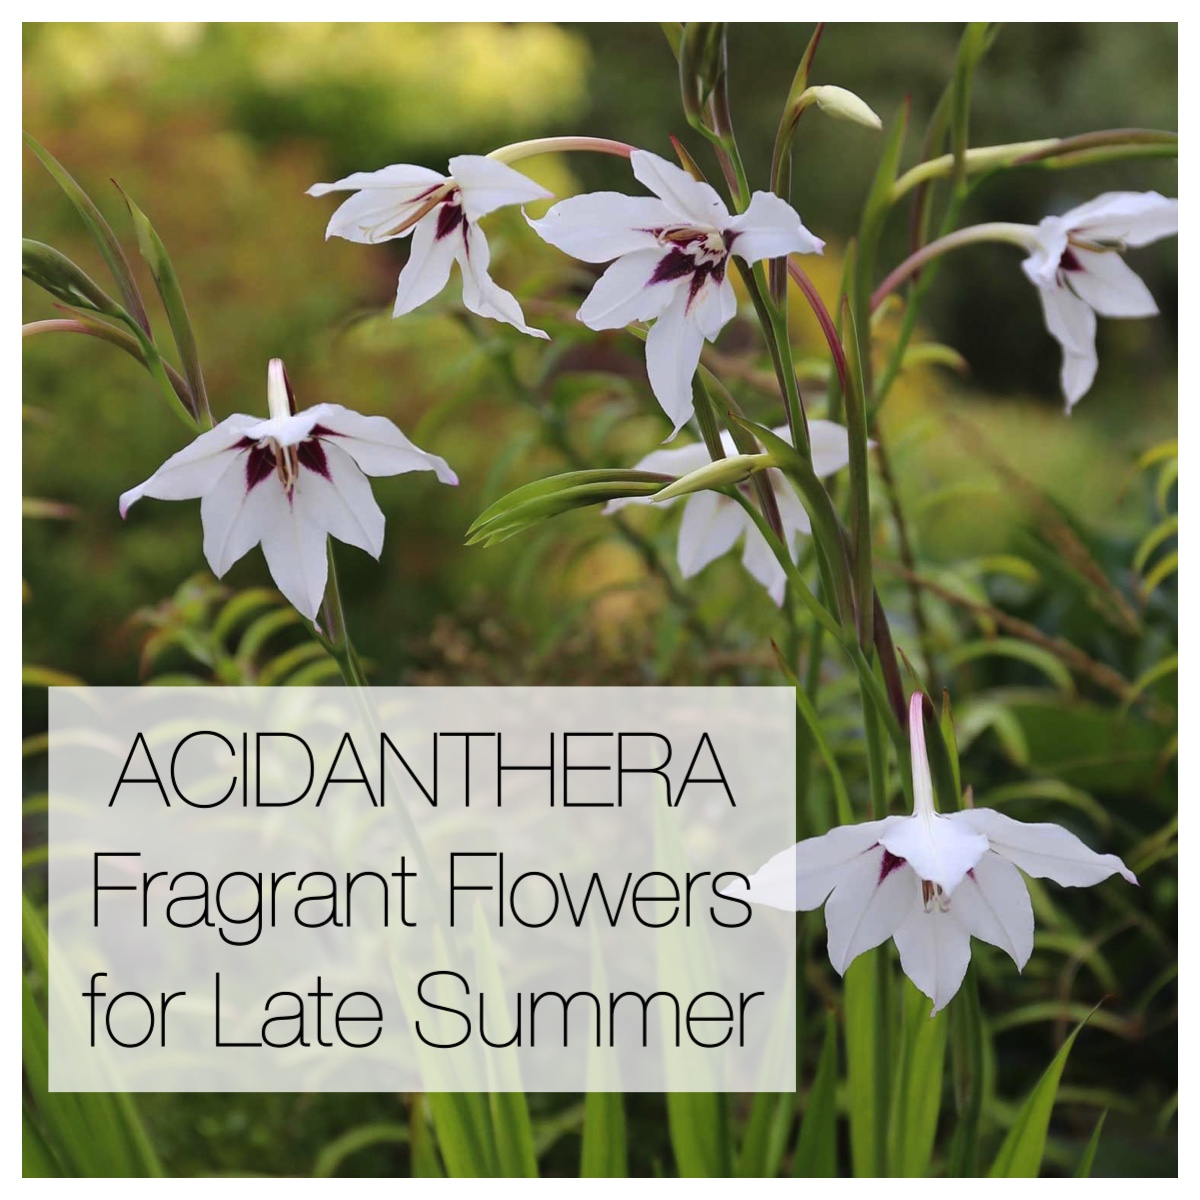 Acidanthera: Fragrant Flowers for Late Summer